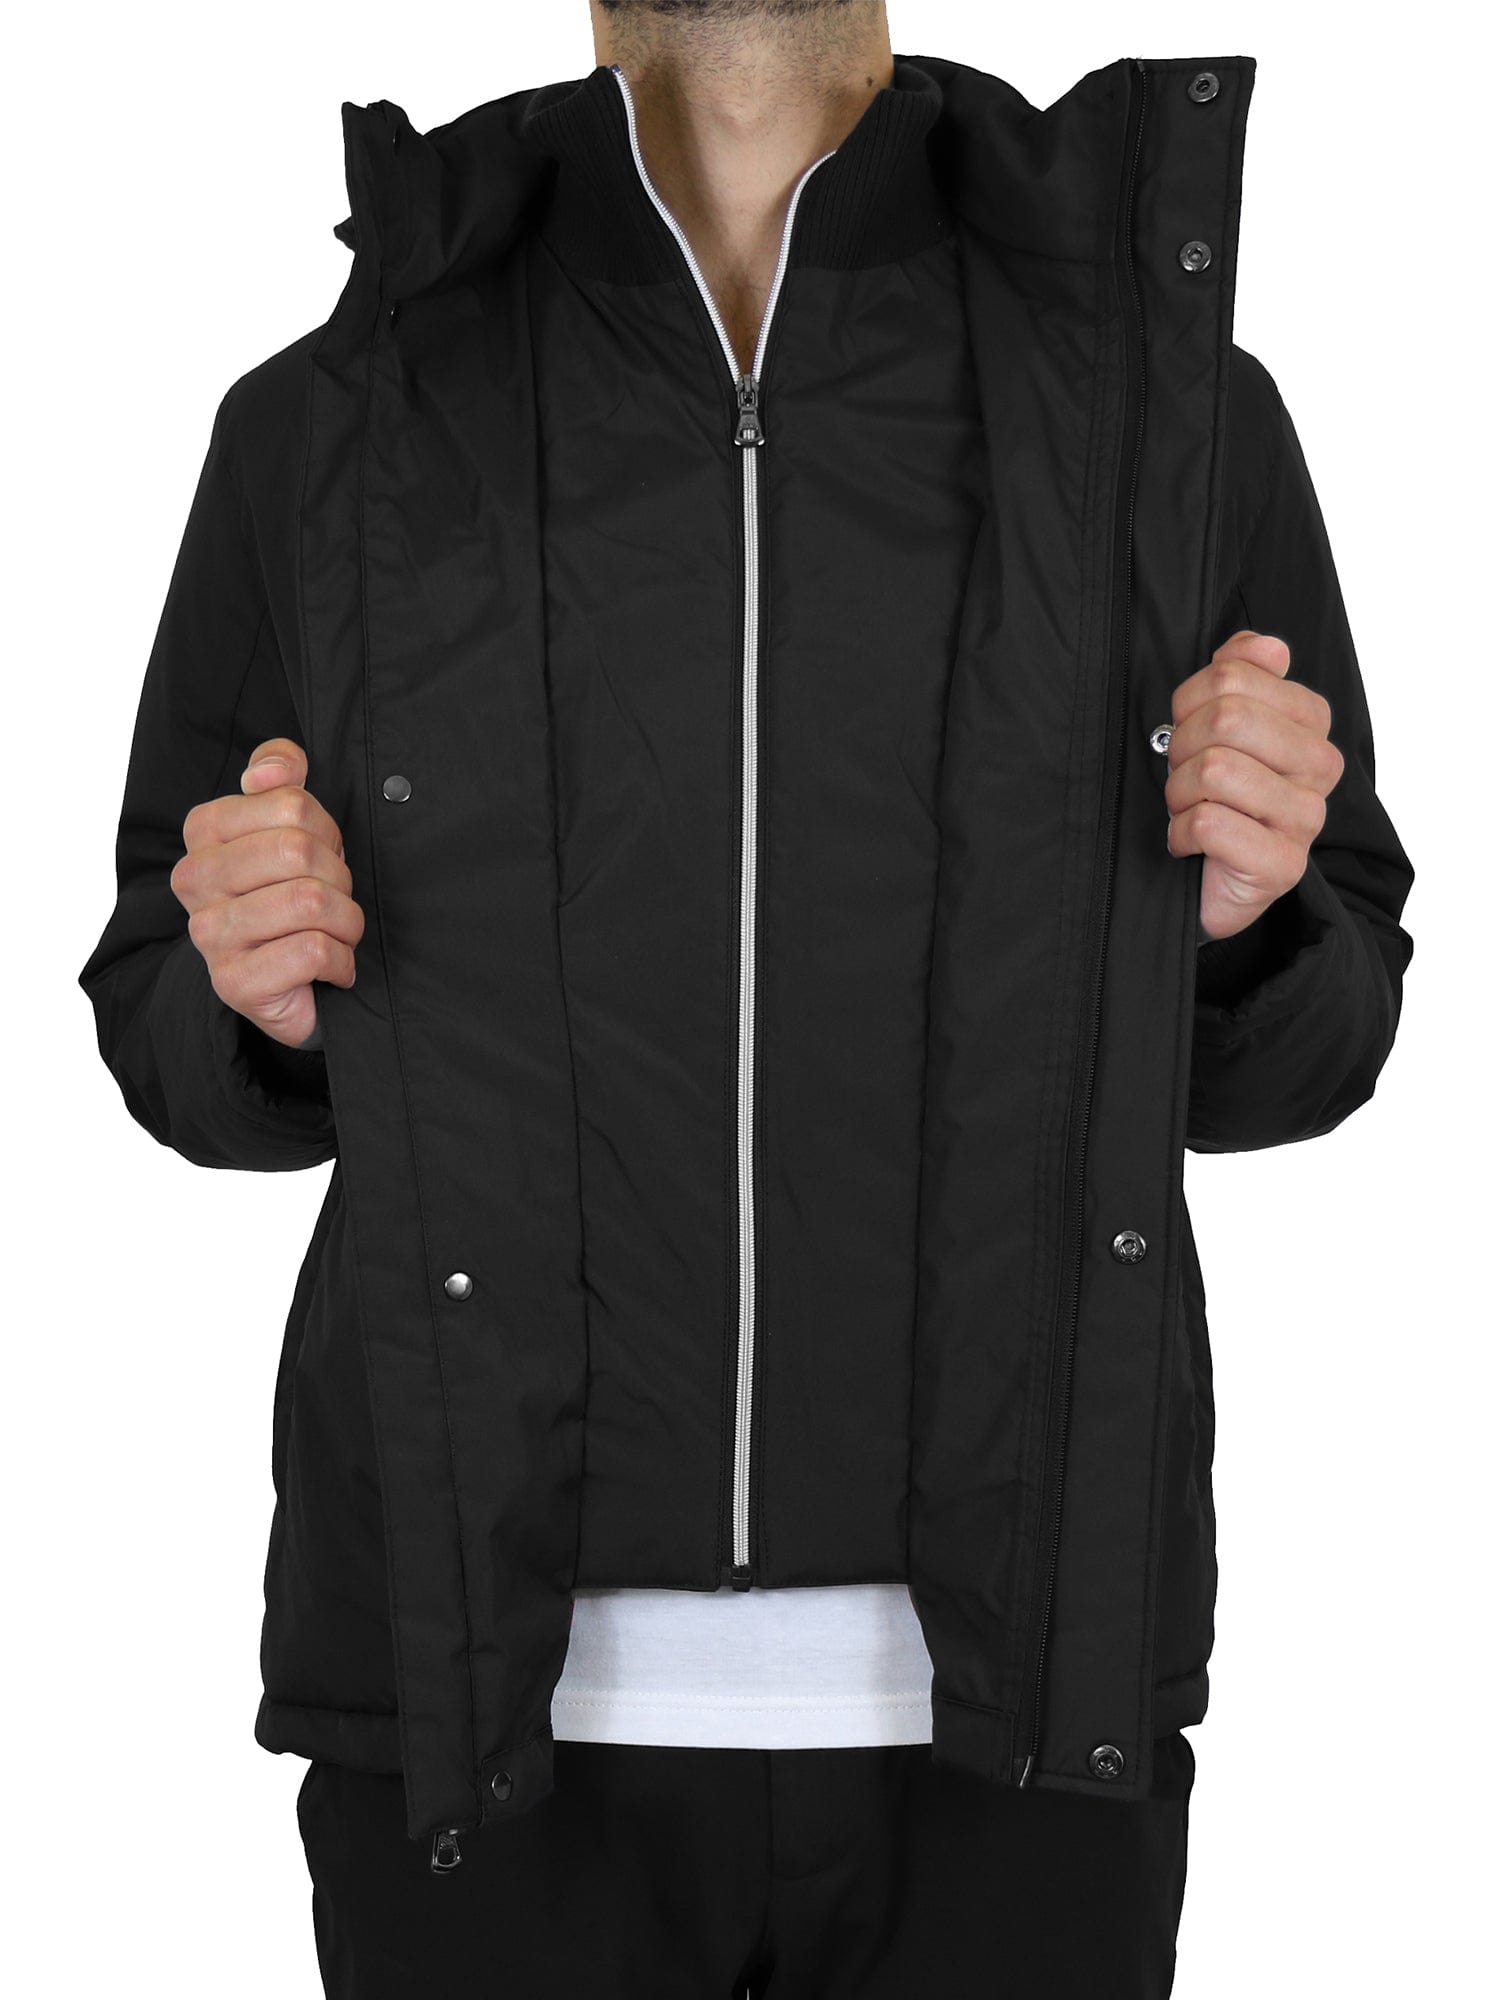 Men's Heavyweight Presidential Jacket With Detachable Hood - GalaxybyHarvic